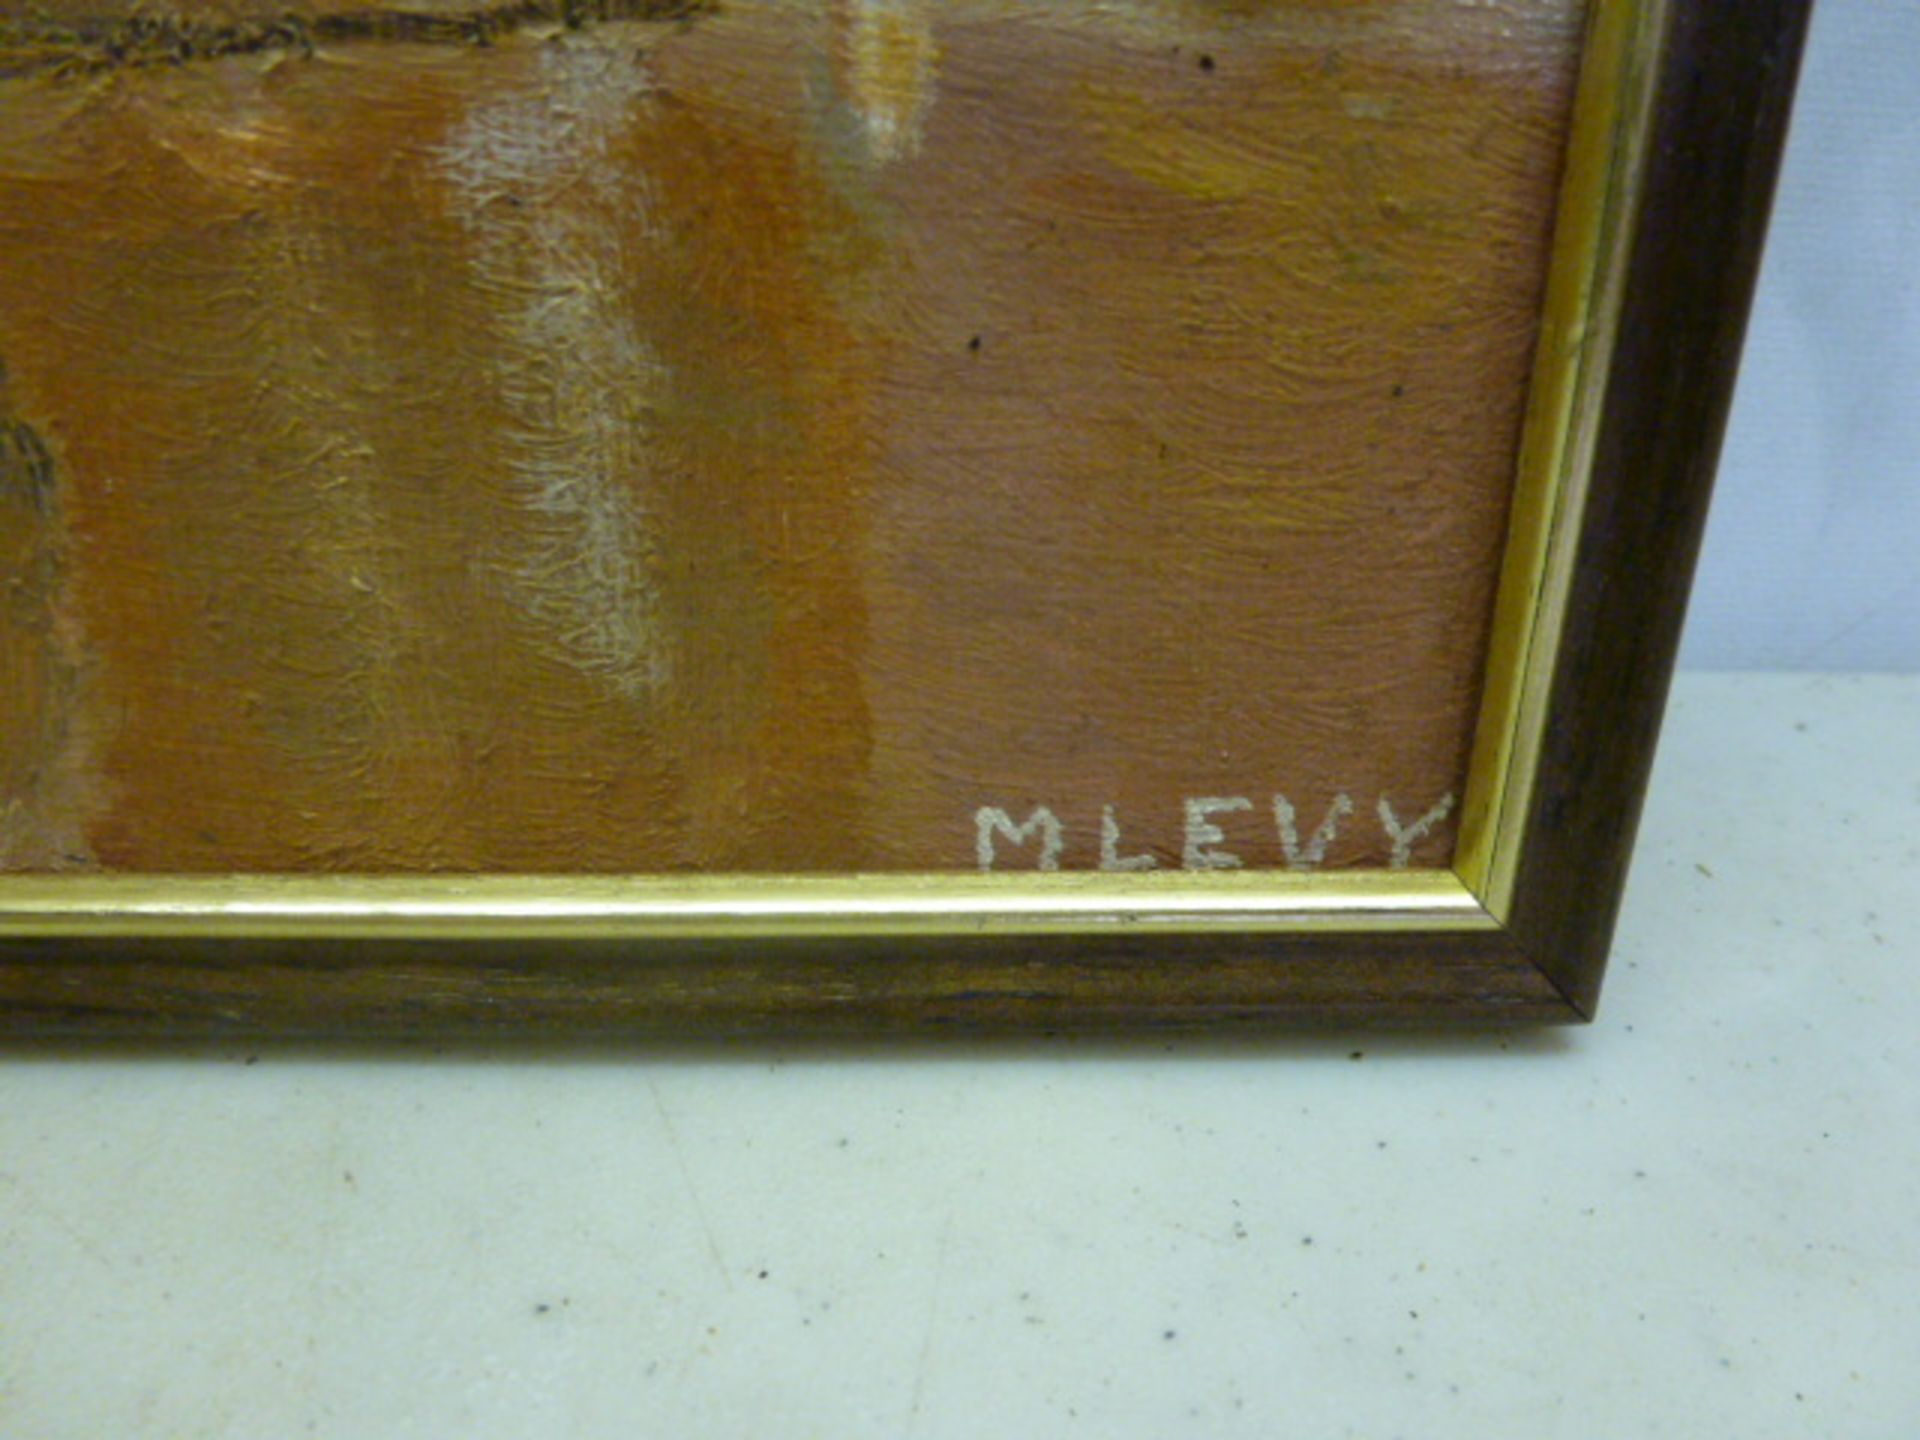 Framed Oil on Board of 3 Ships at Anchor Signed by M Levy, 1981. Size 27cm x 32cm - Image 2 of 2